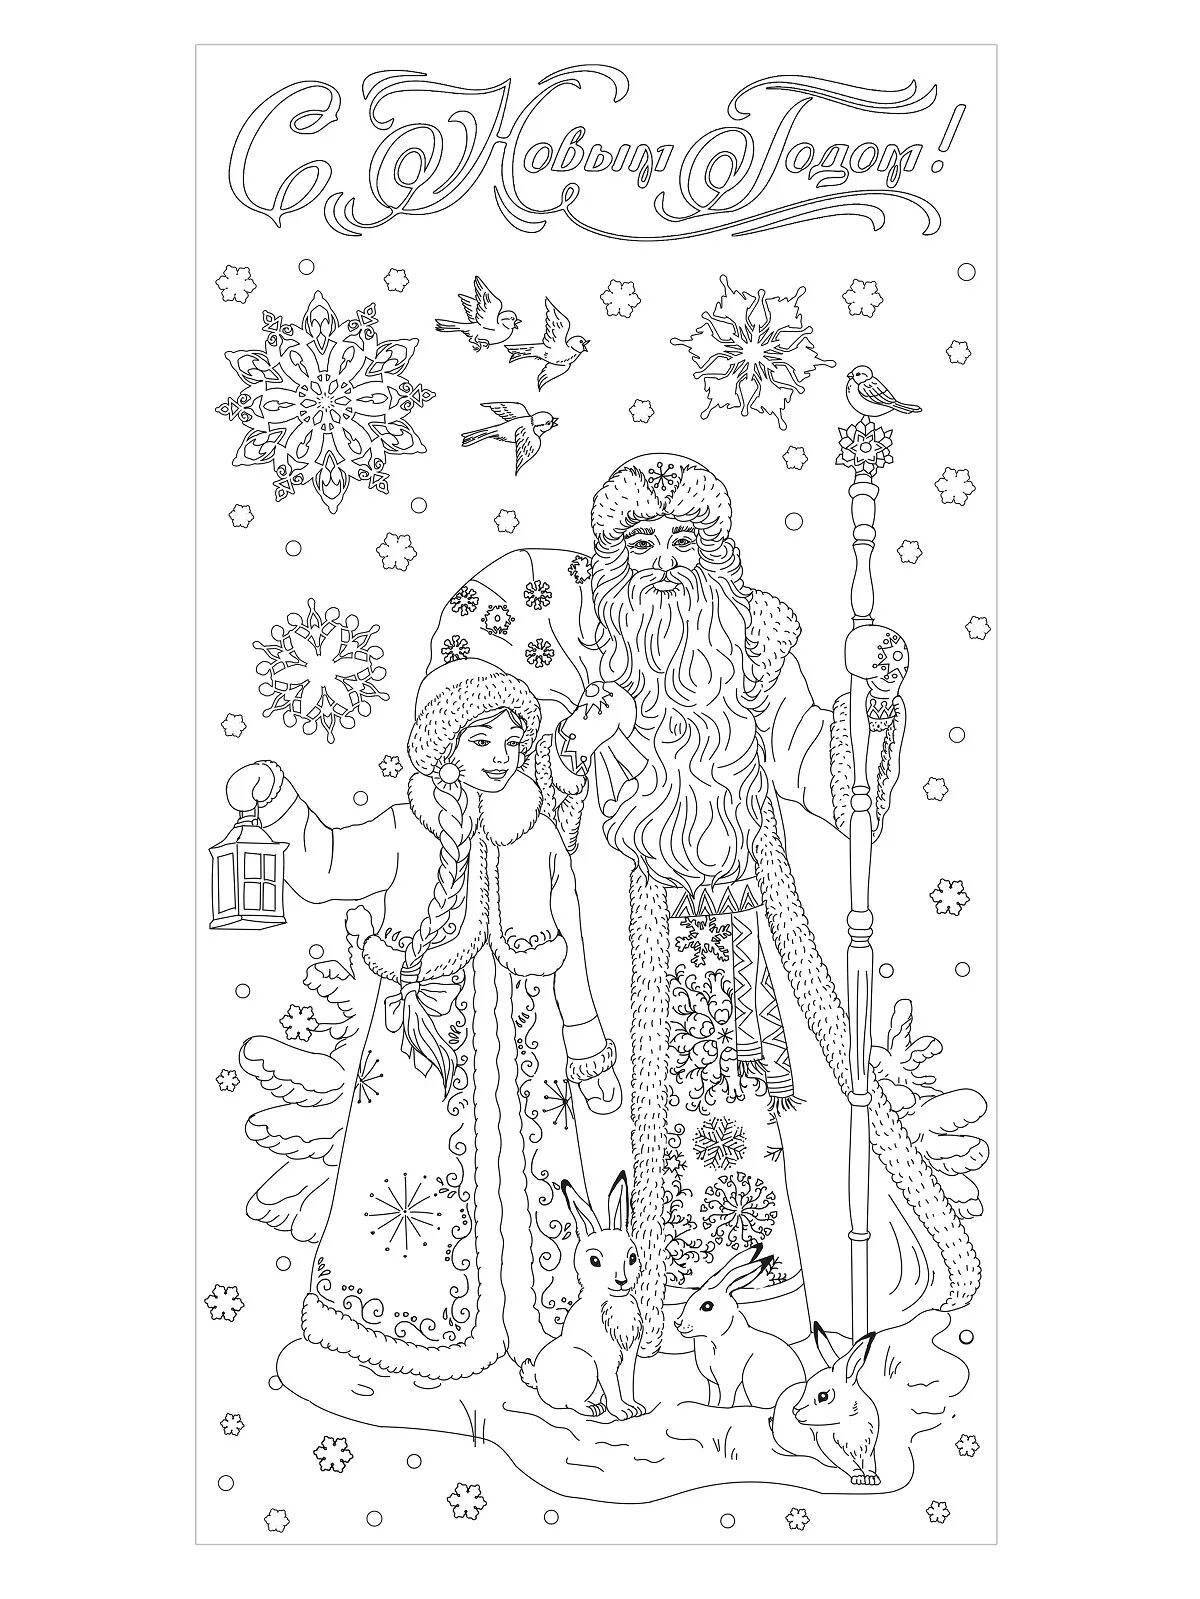 Charming coloring book Santa Claus and Snow Maiden